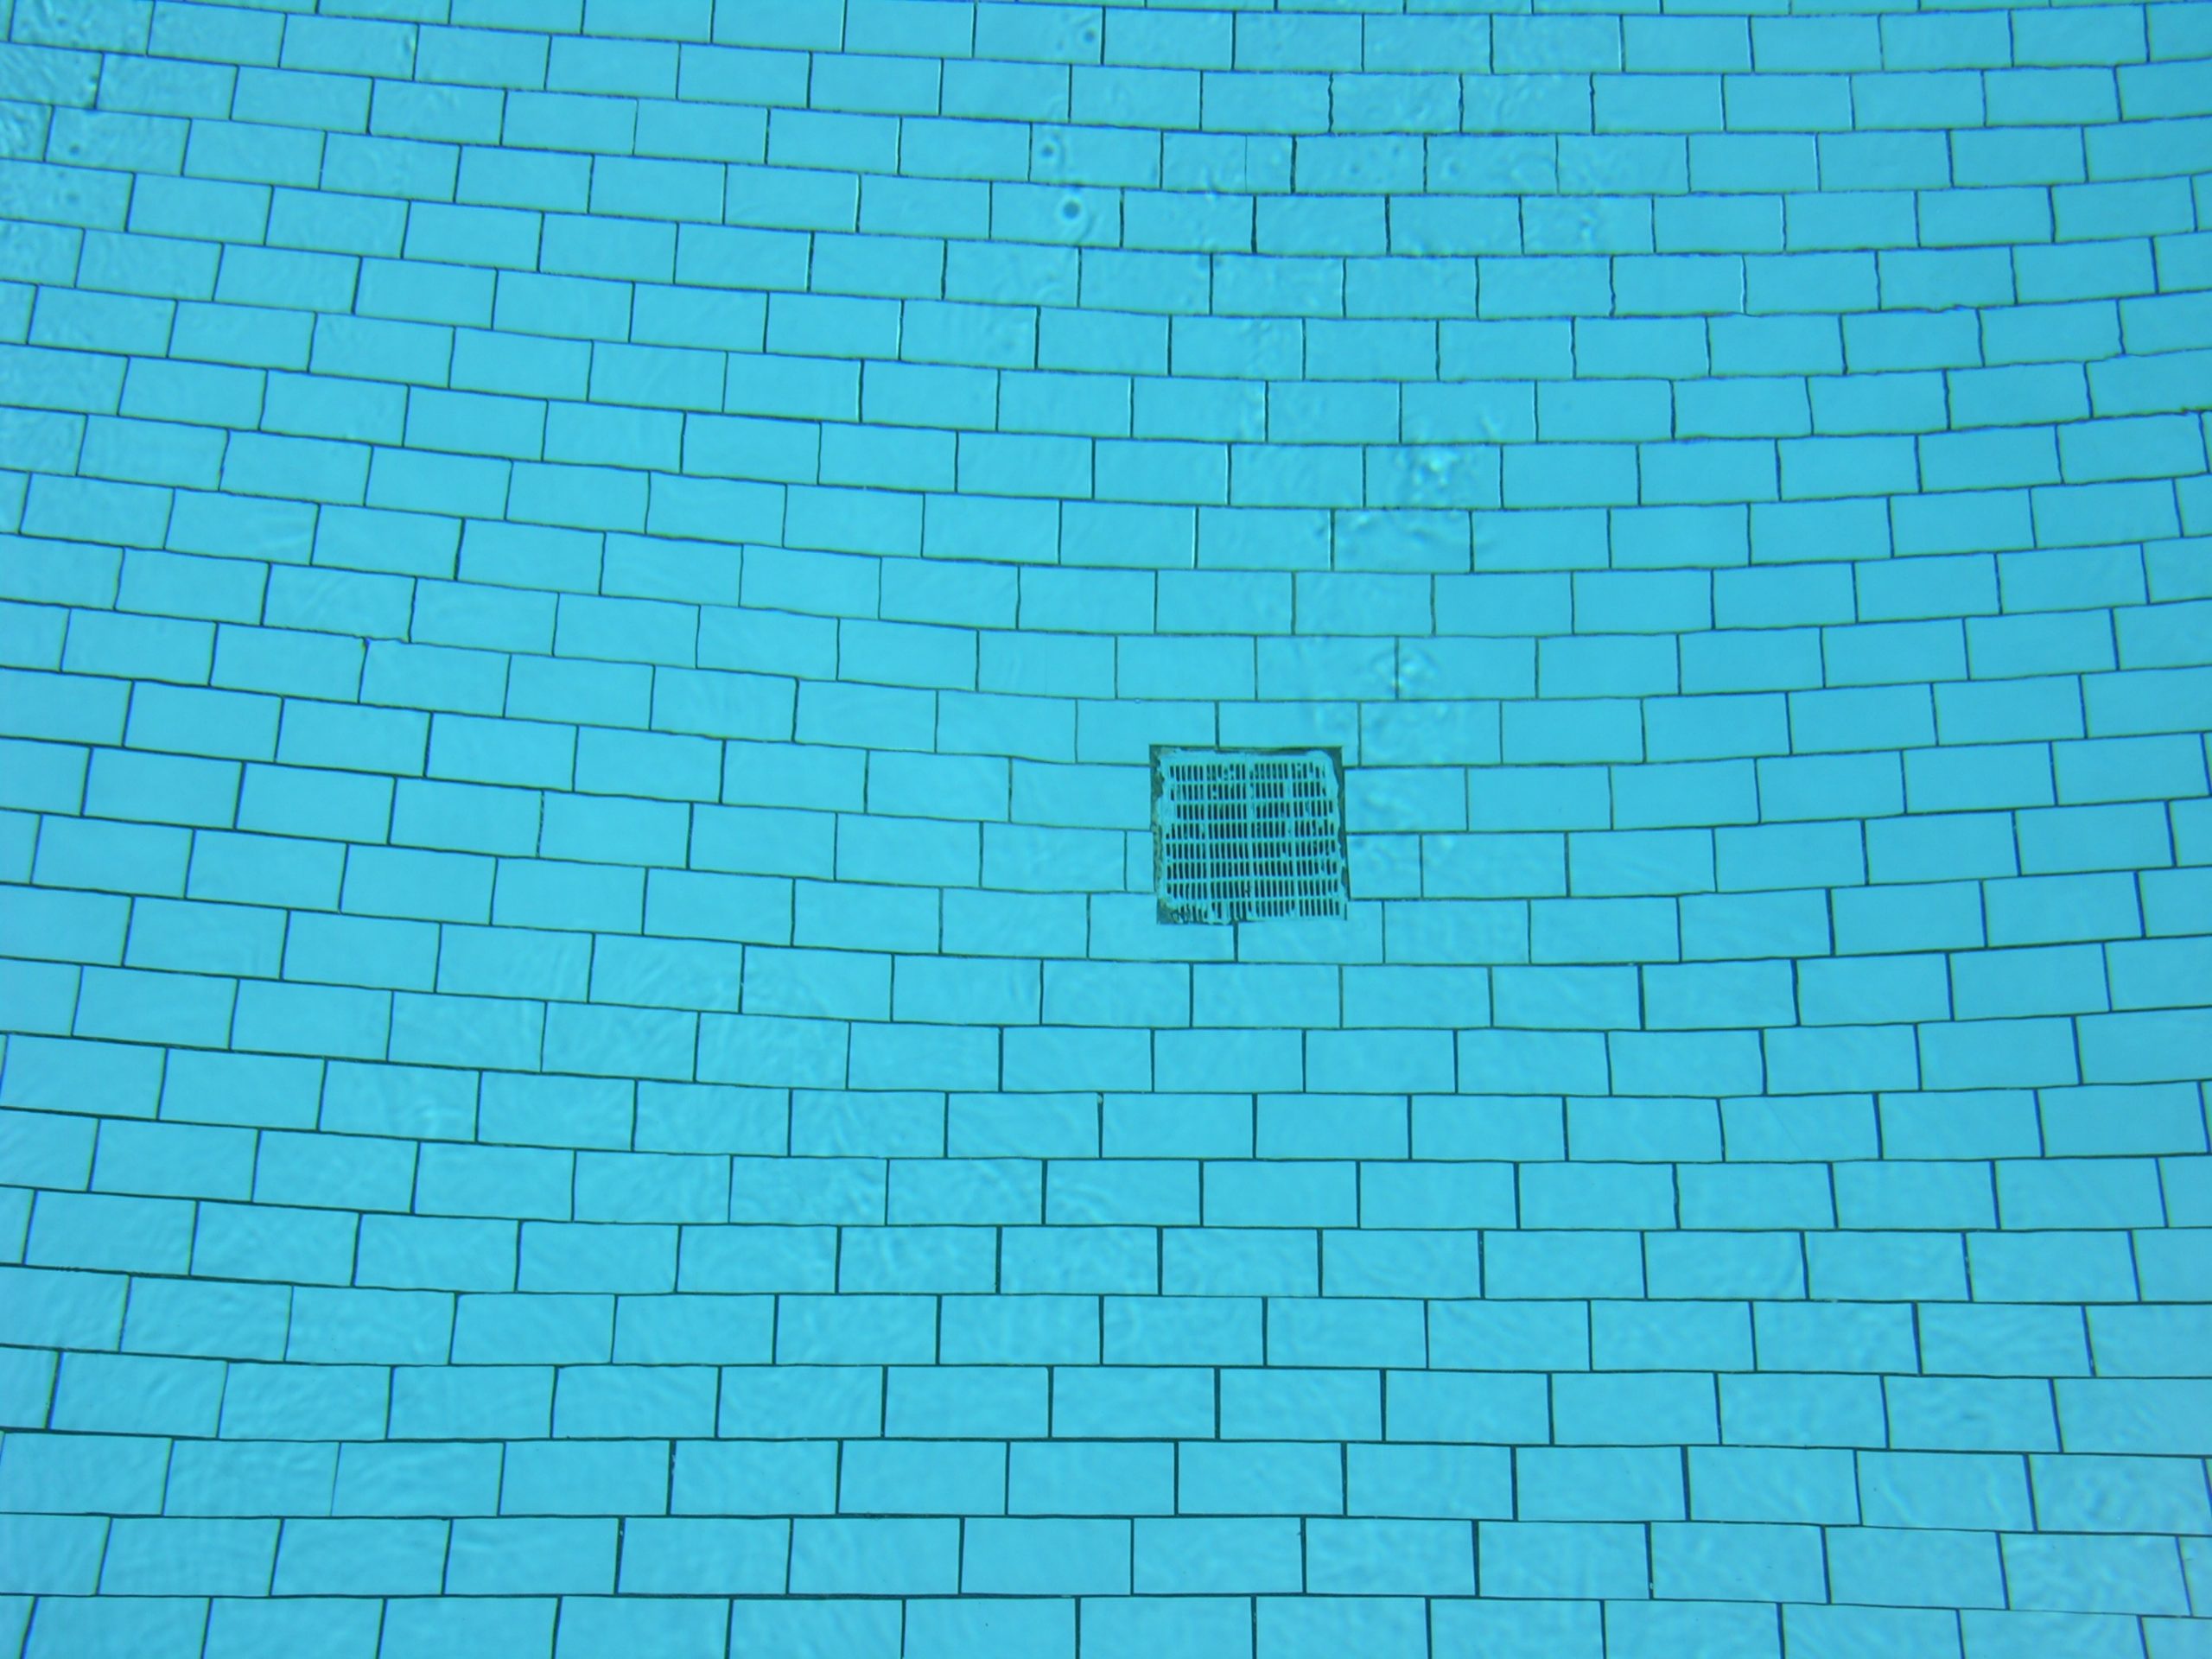 Pool drainage system designed to remove excess water from the pool for maintenance or to control water levels.